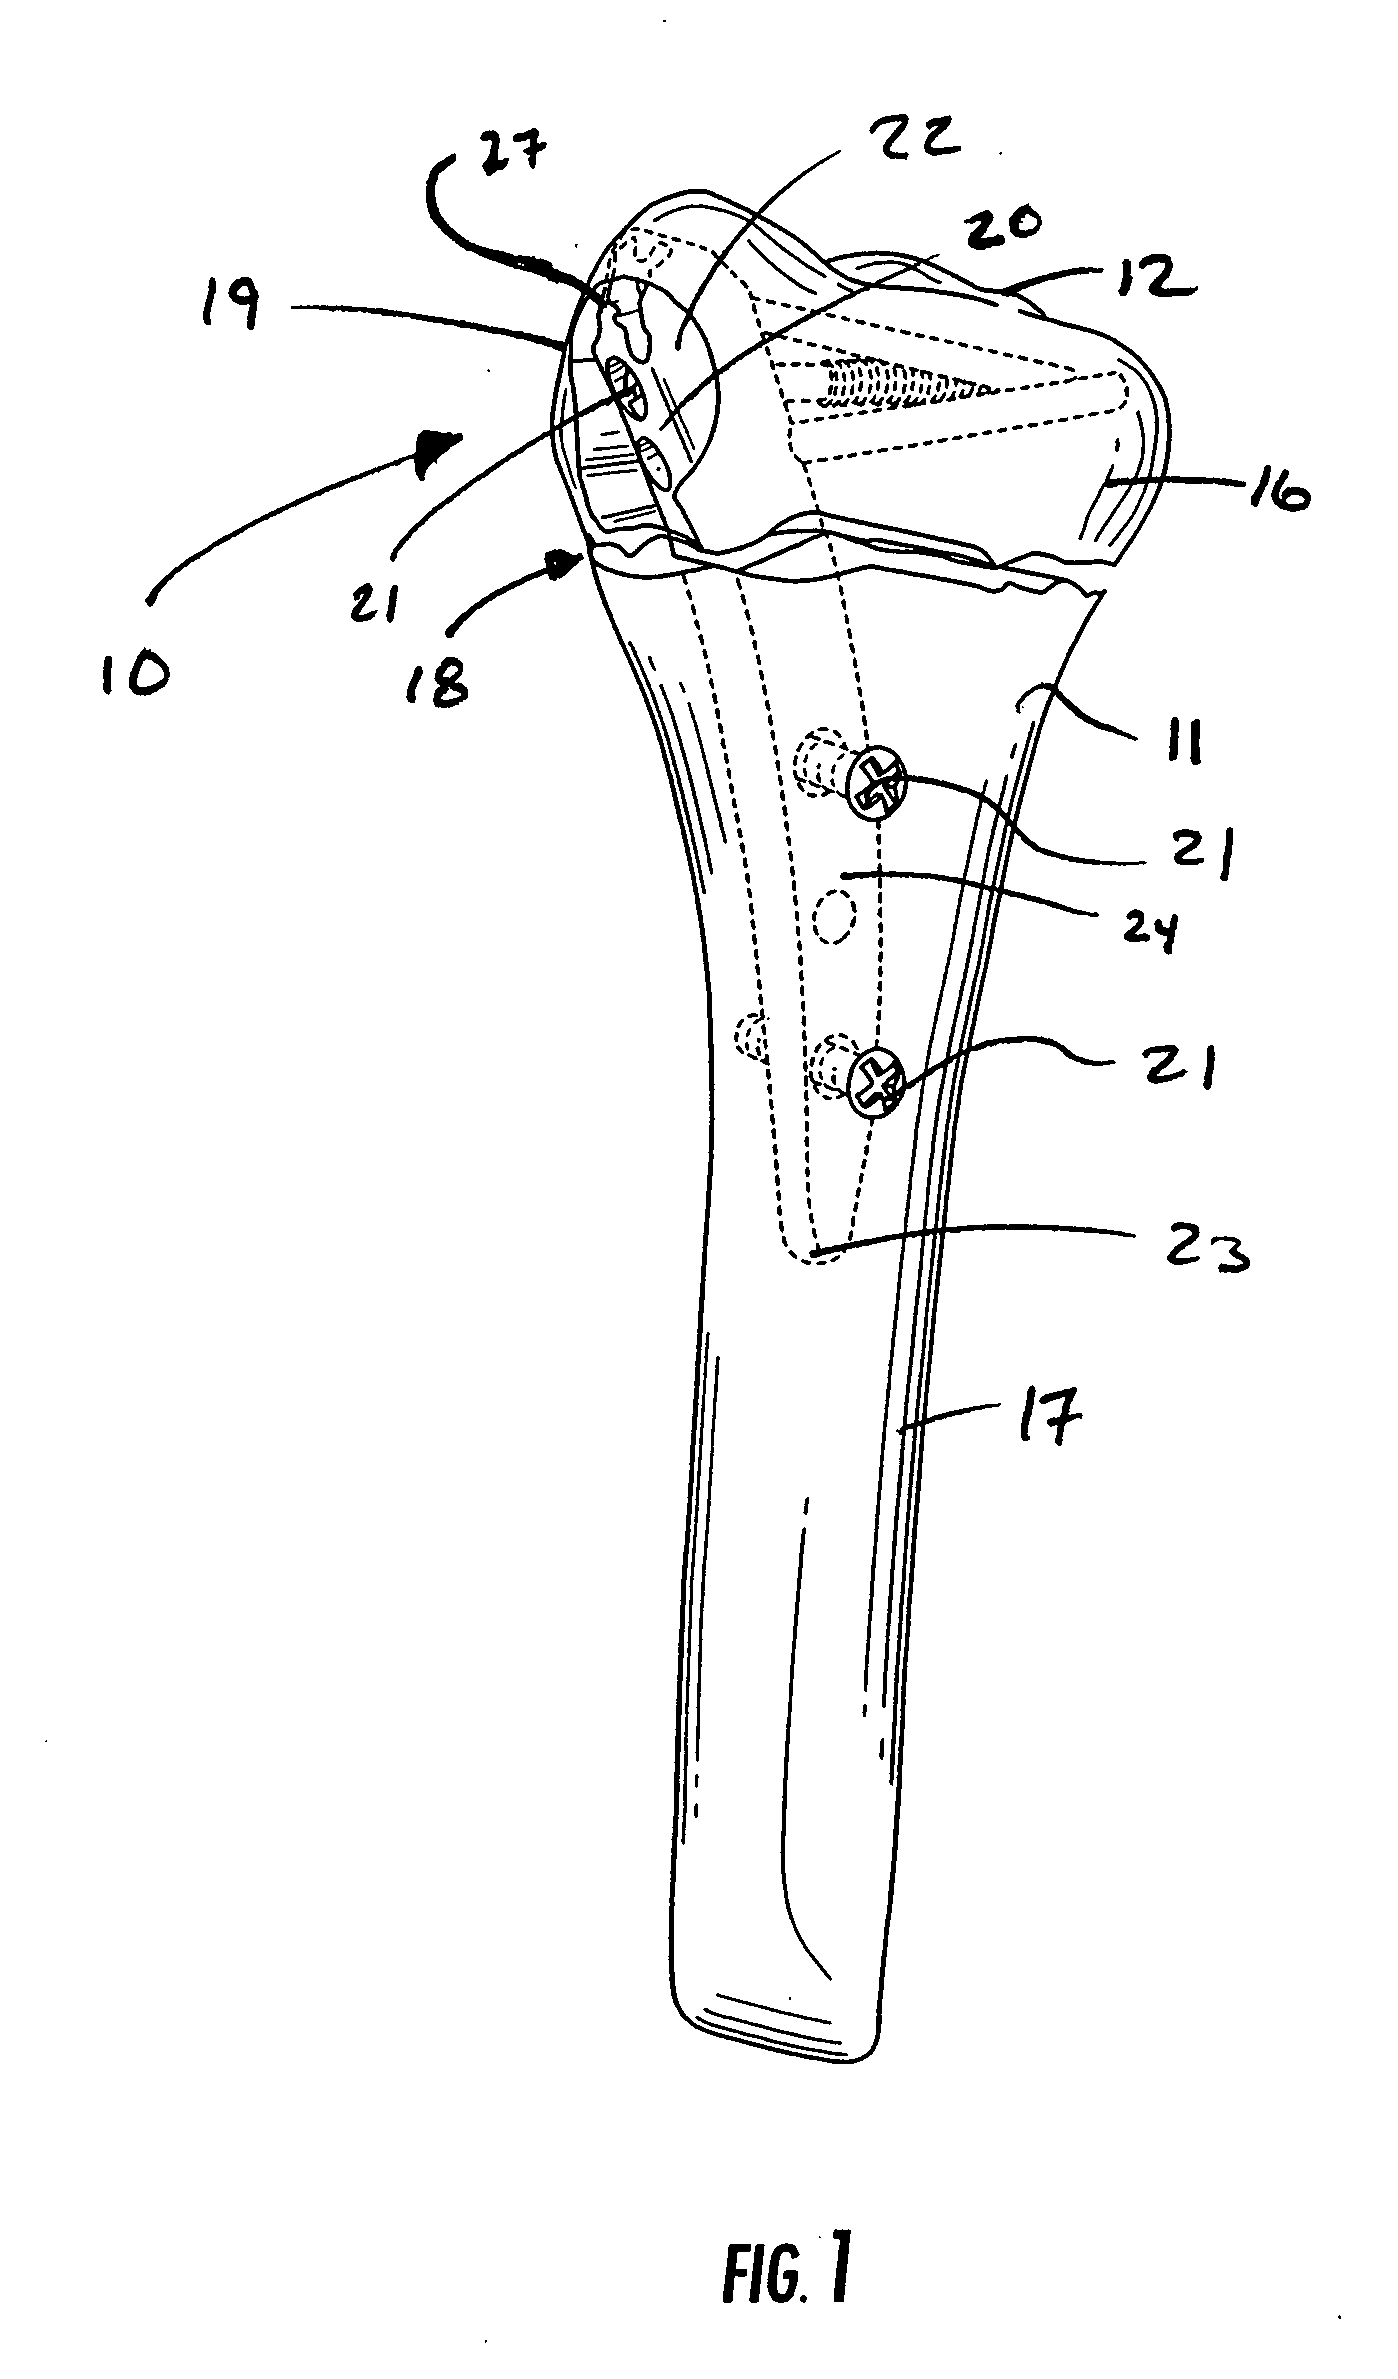 Intramedullary fixation assembly and devices and methods for installing the same